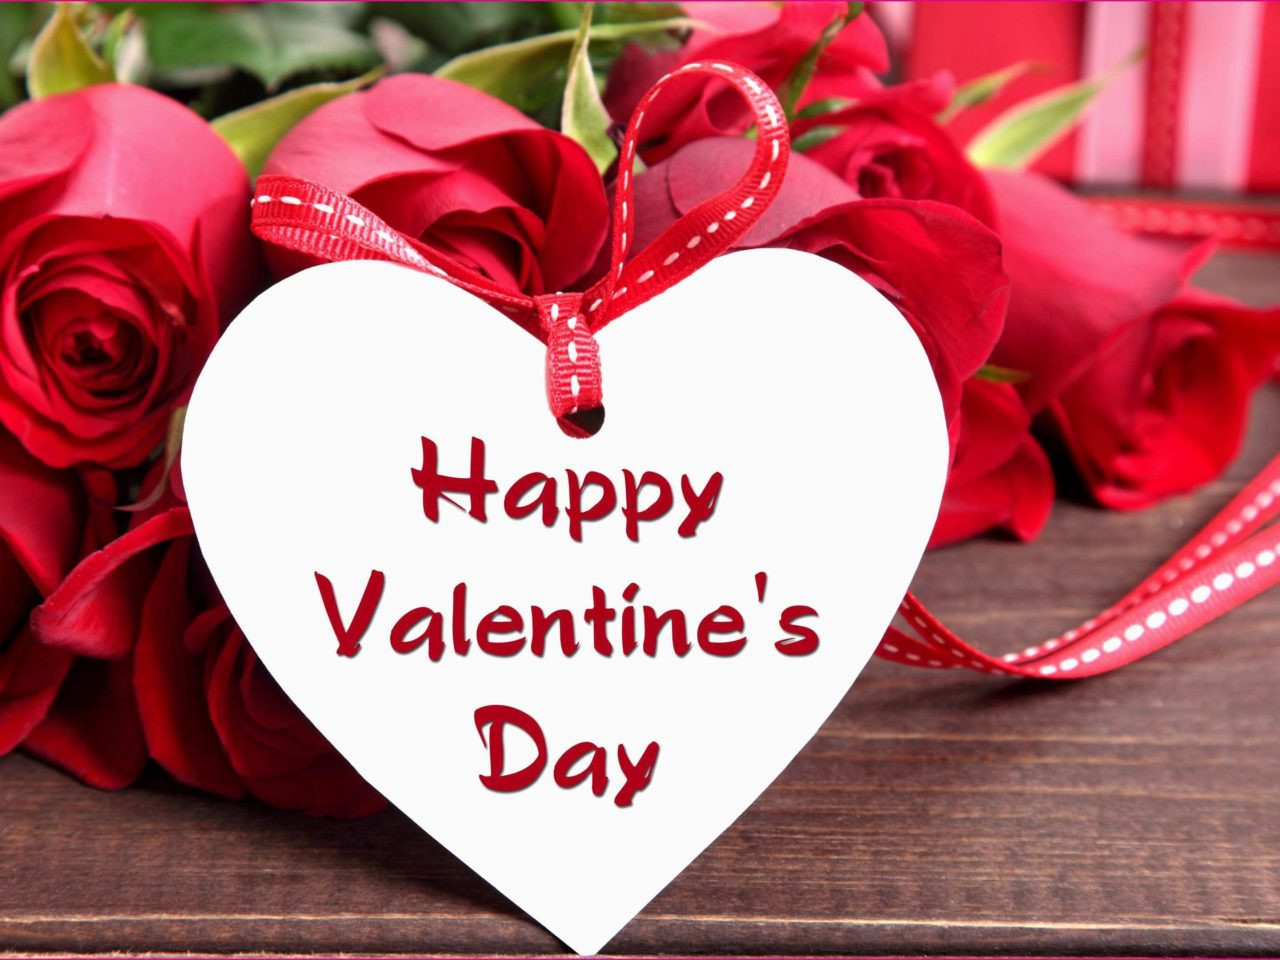 Valentines Day Pic And Quotes
 Happy Valentines Day Wishes Quotes Messages love HD